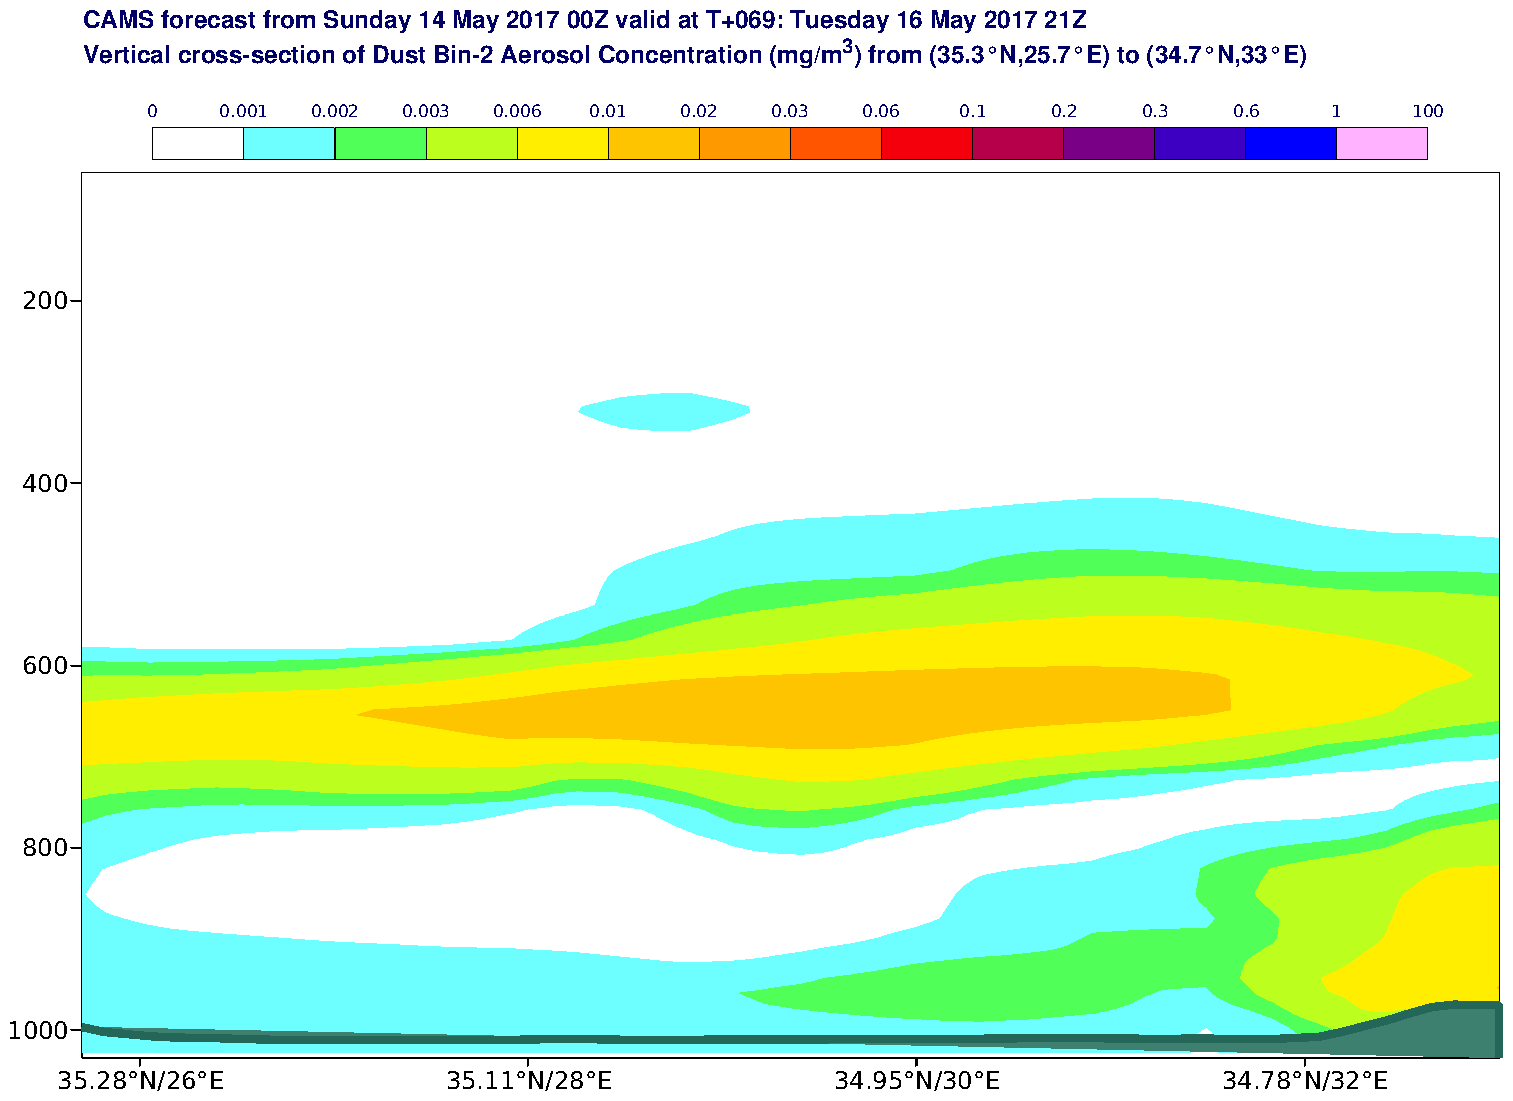 Vertical cross-section of Dust Bin-2 Aerosol Concentration (mg/m3) valid at T69 - 2017-05-16 21:00